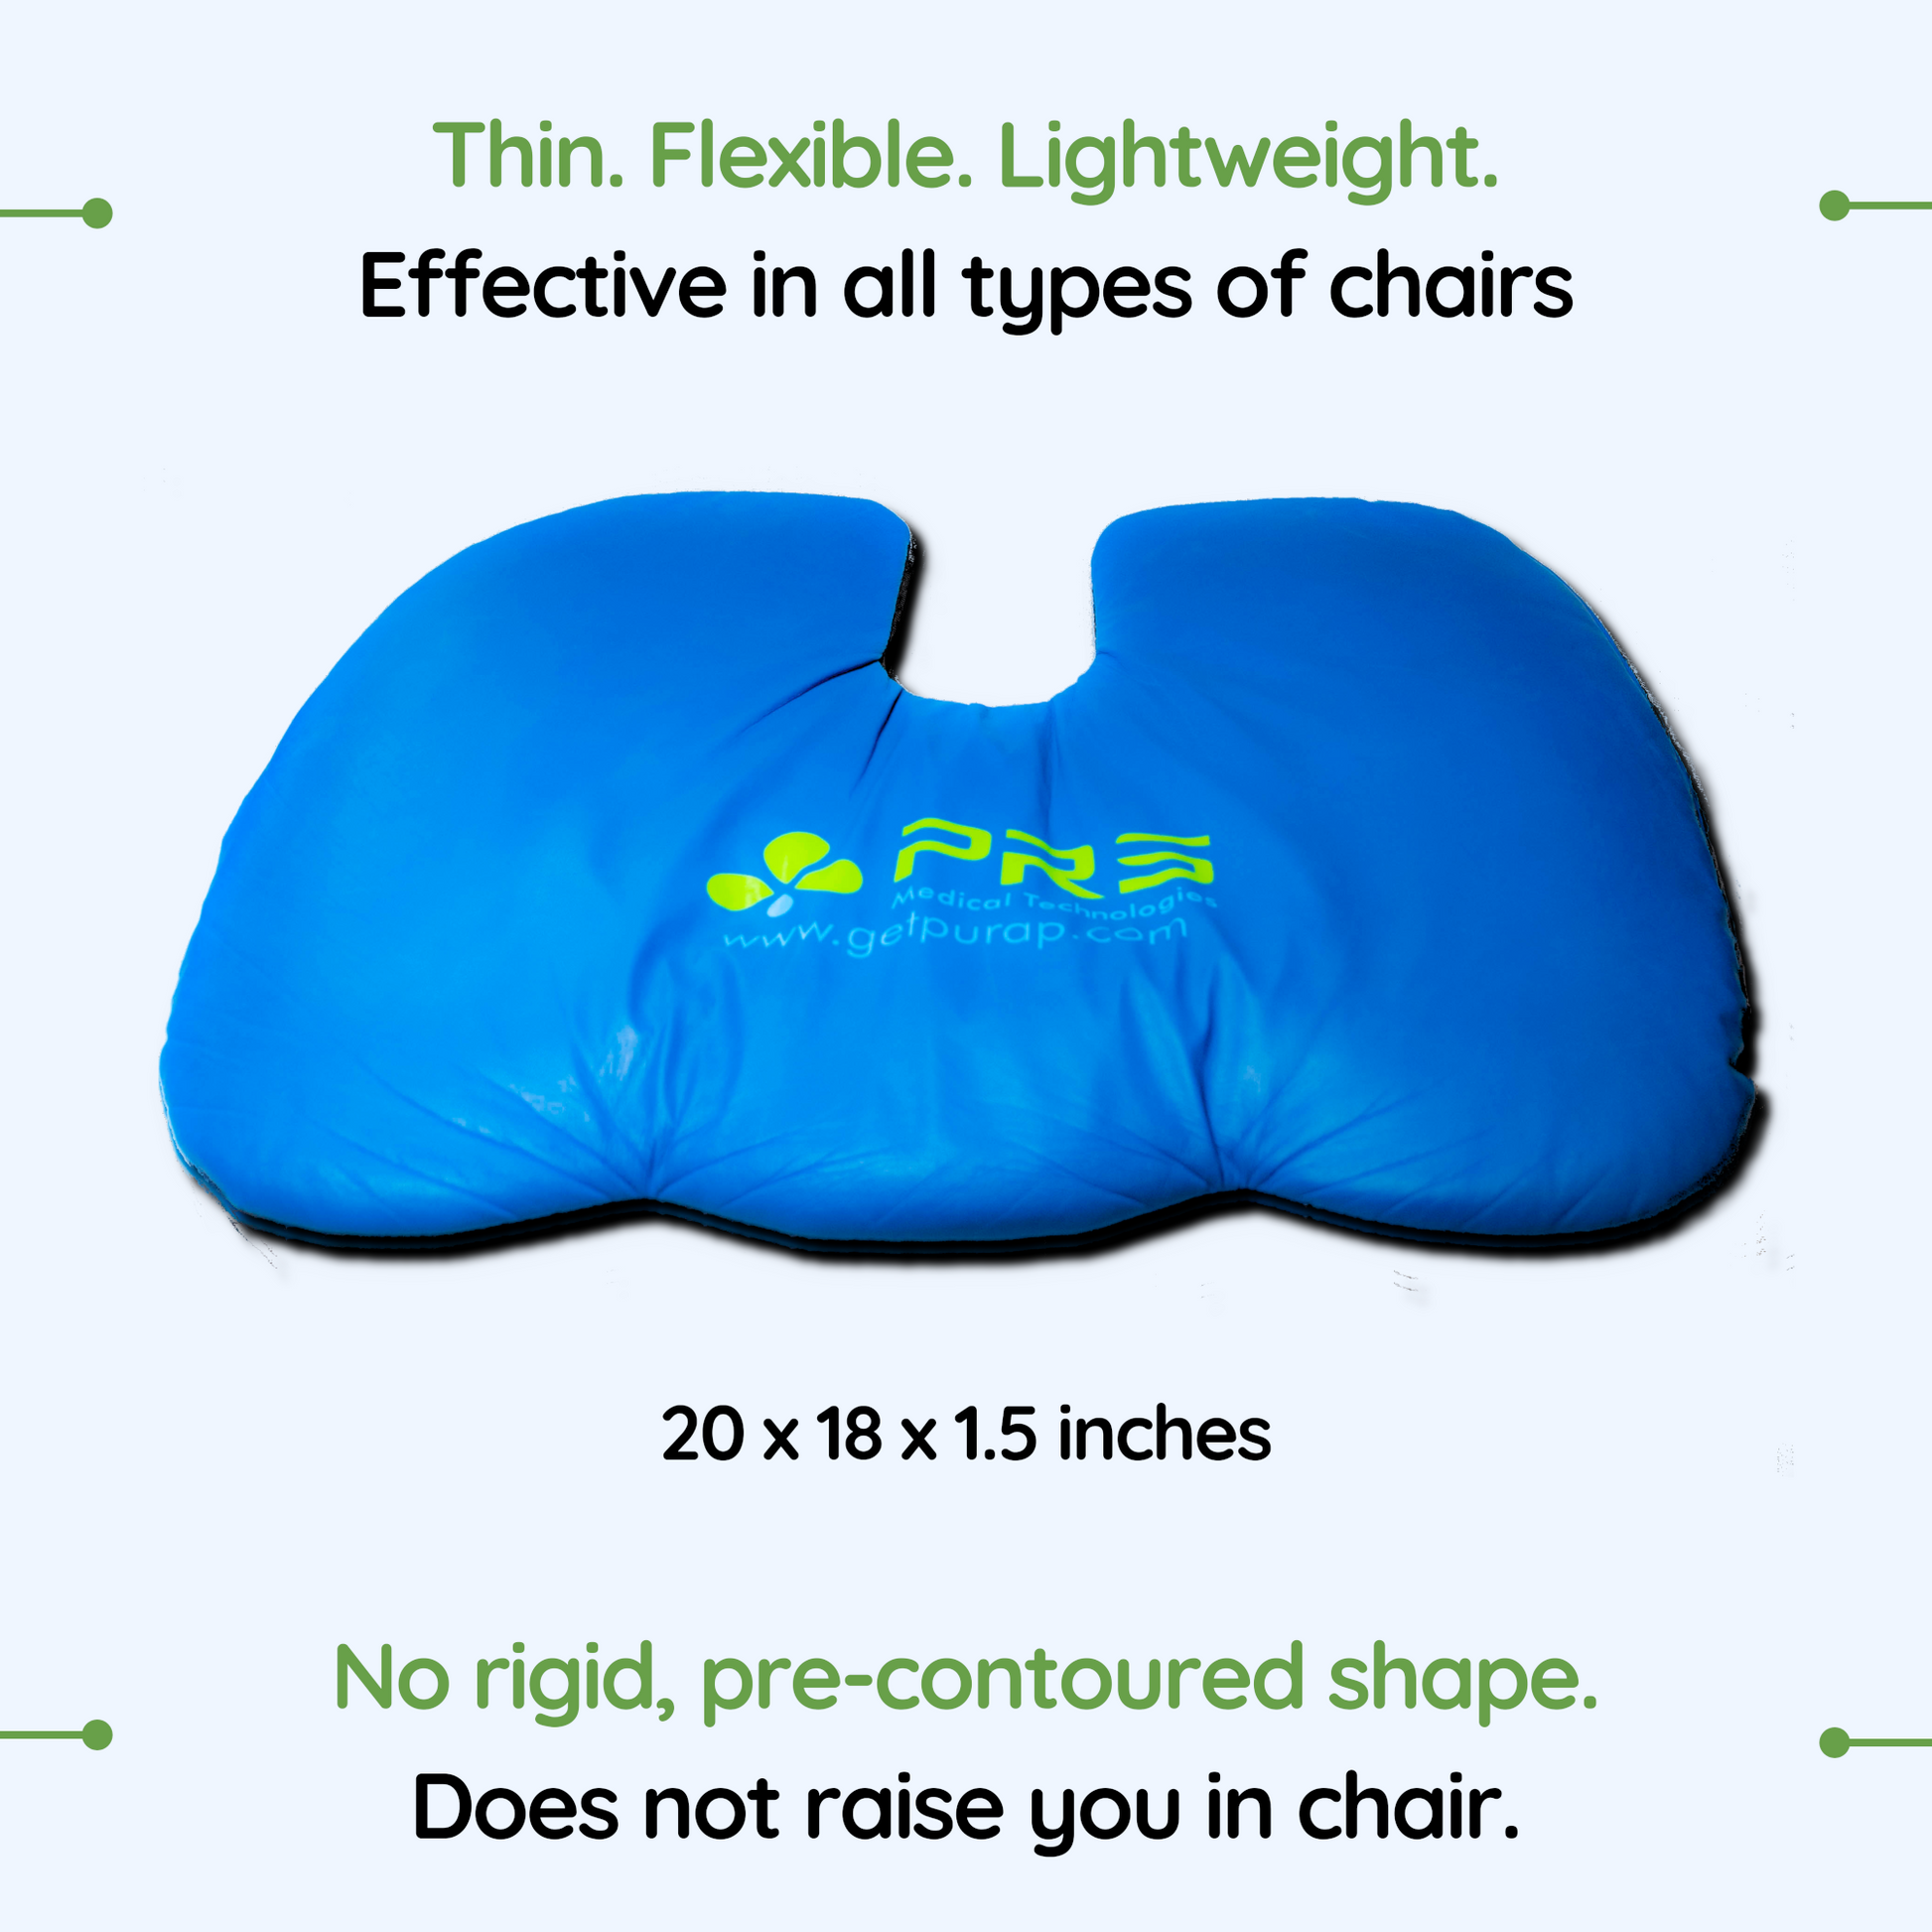 Car Seat Cushion, Comfort Memory Foam Car Cushions For Driving - Sciatica &  Lower Back Pain Relief, Seat Cushion For Car Seat Driver, Office Chair